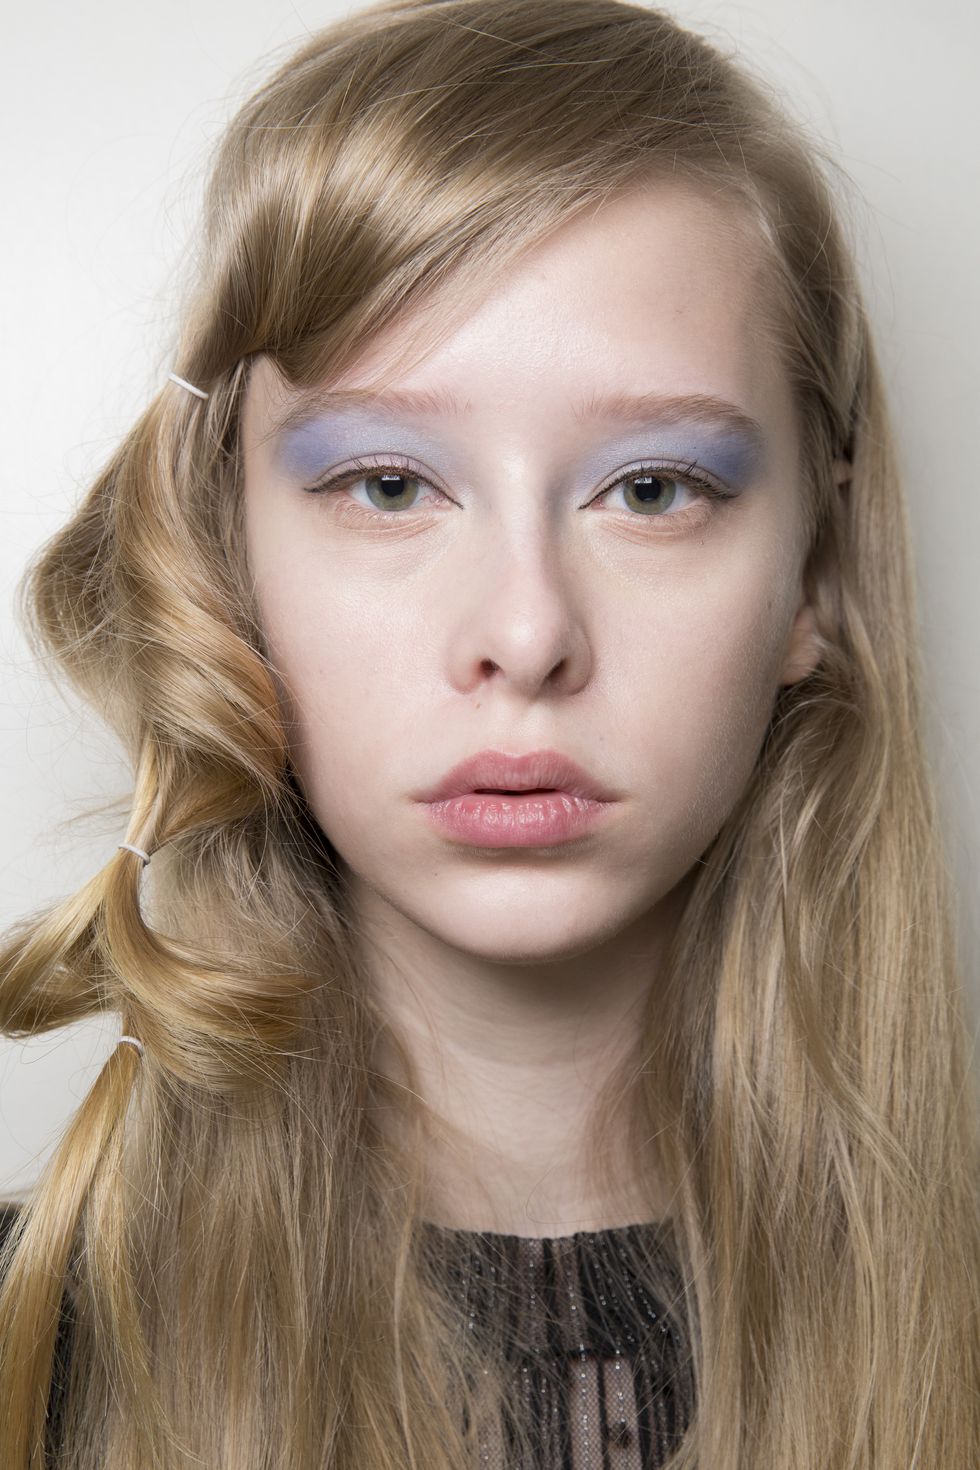 NYFW Beauty Trends in Hair, Makeup and Nails — Suzanne Spiegoski